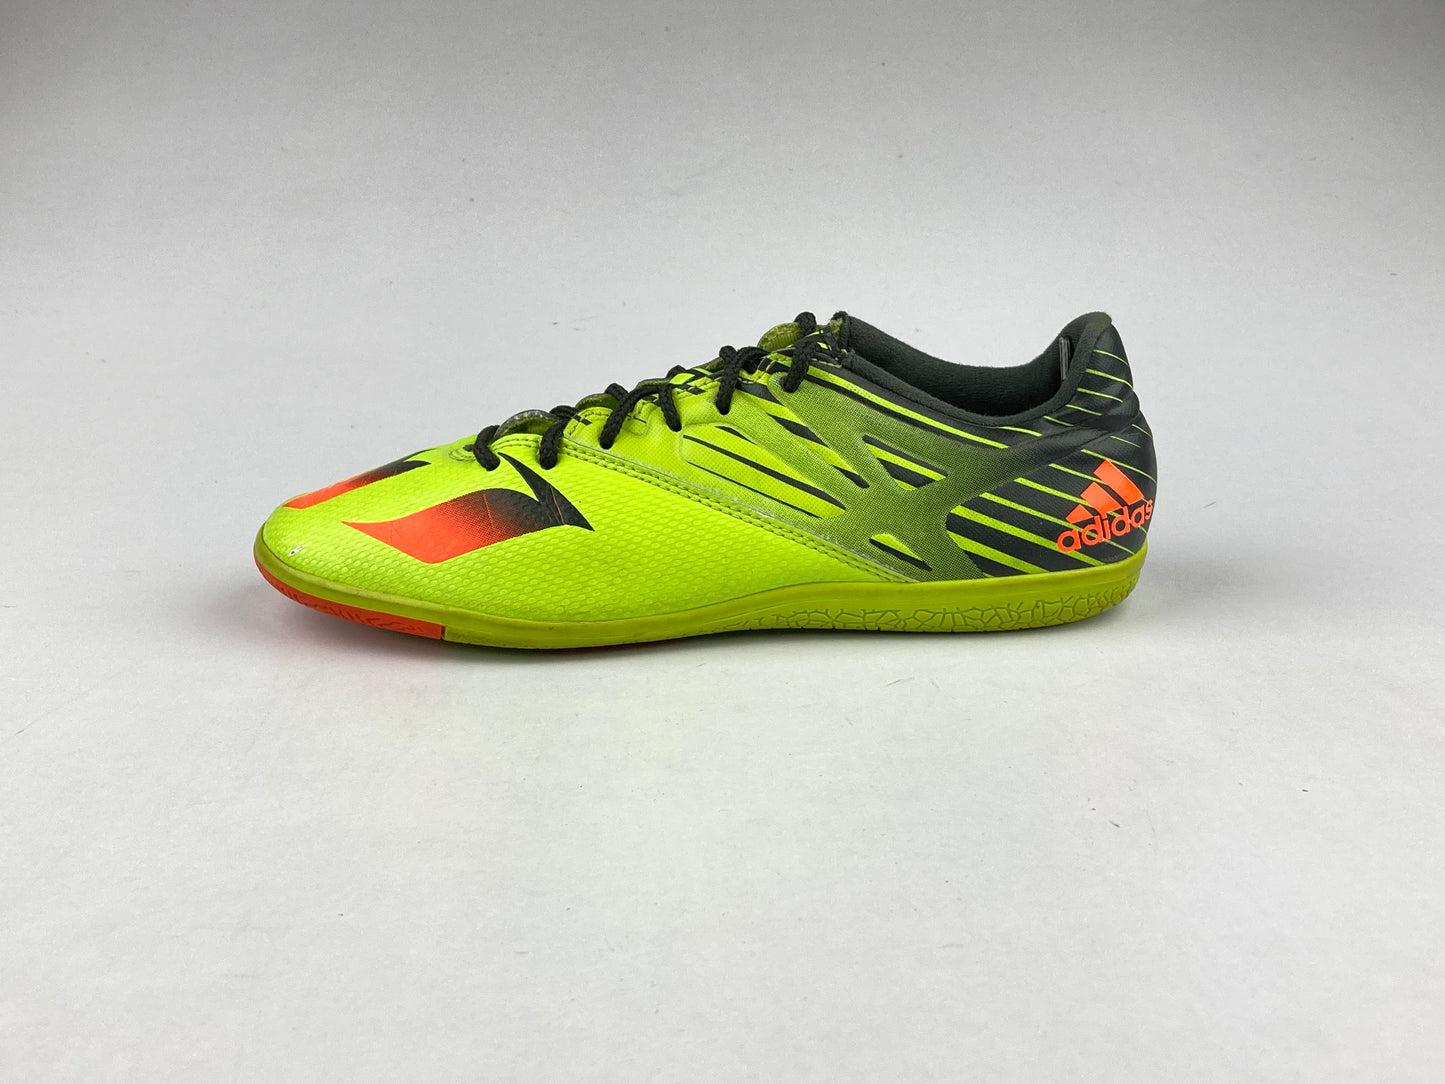 adidas Messi 15.3 IN 'Green/Black' s74691